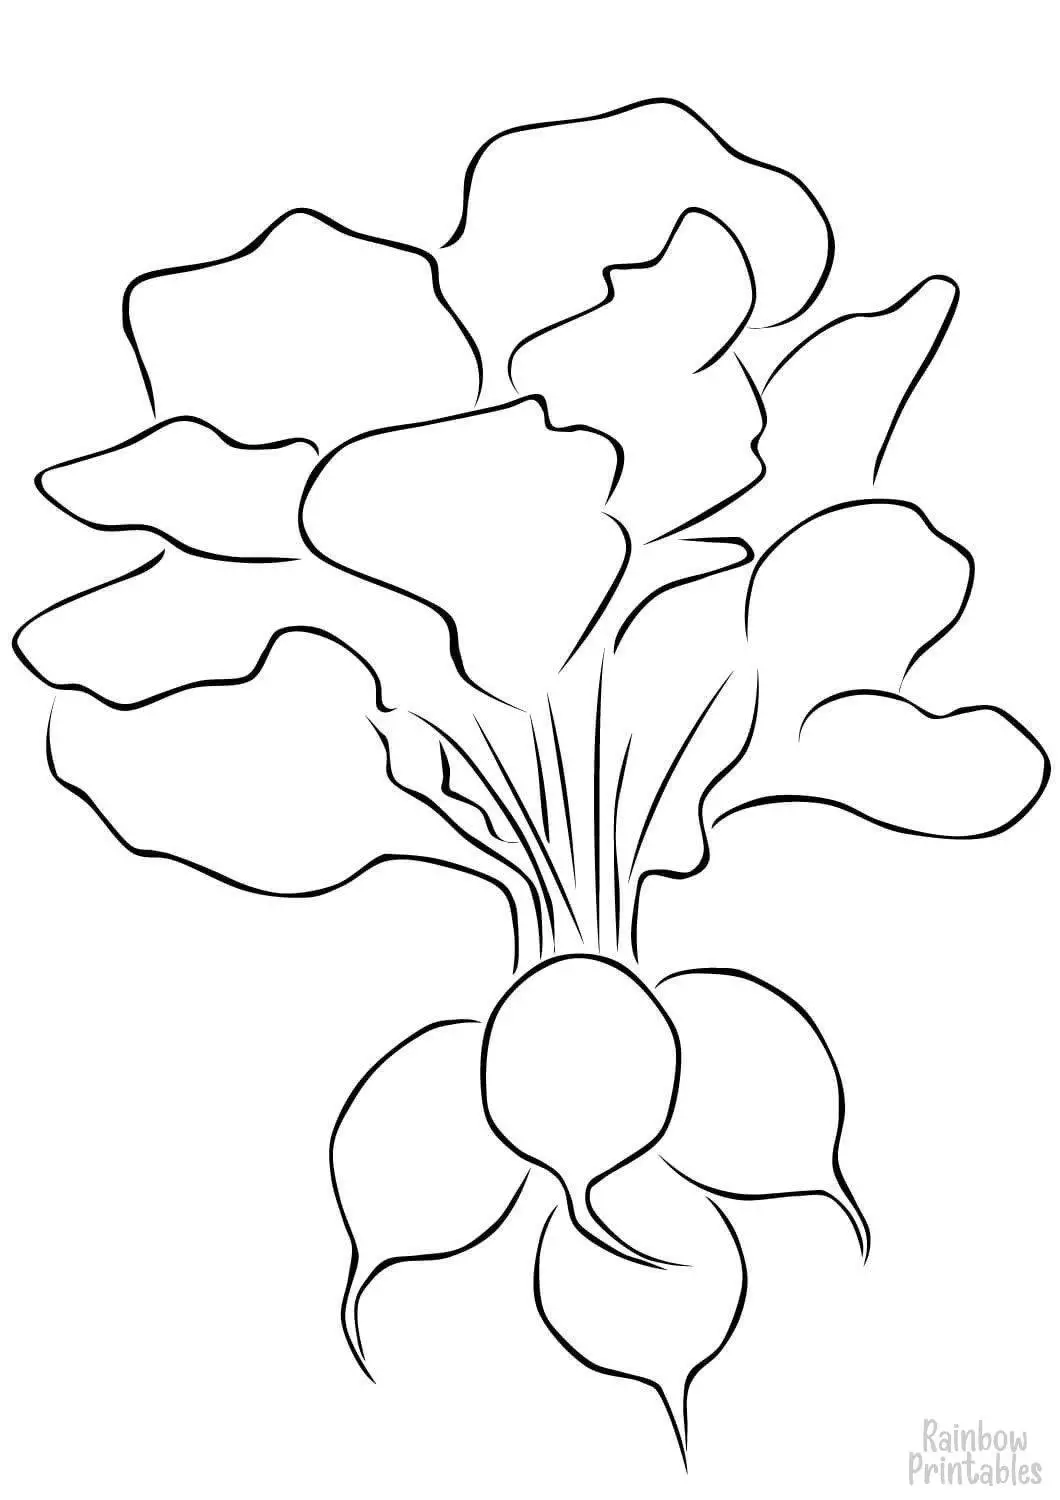 FRESH VEGETABLE RADISH Clipart Coloring Pages Line Art Drawings for Kids-01